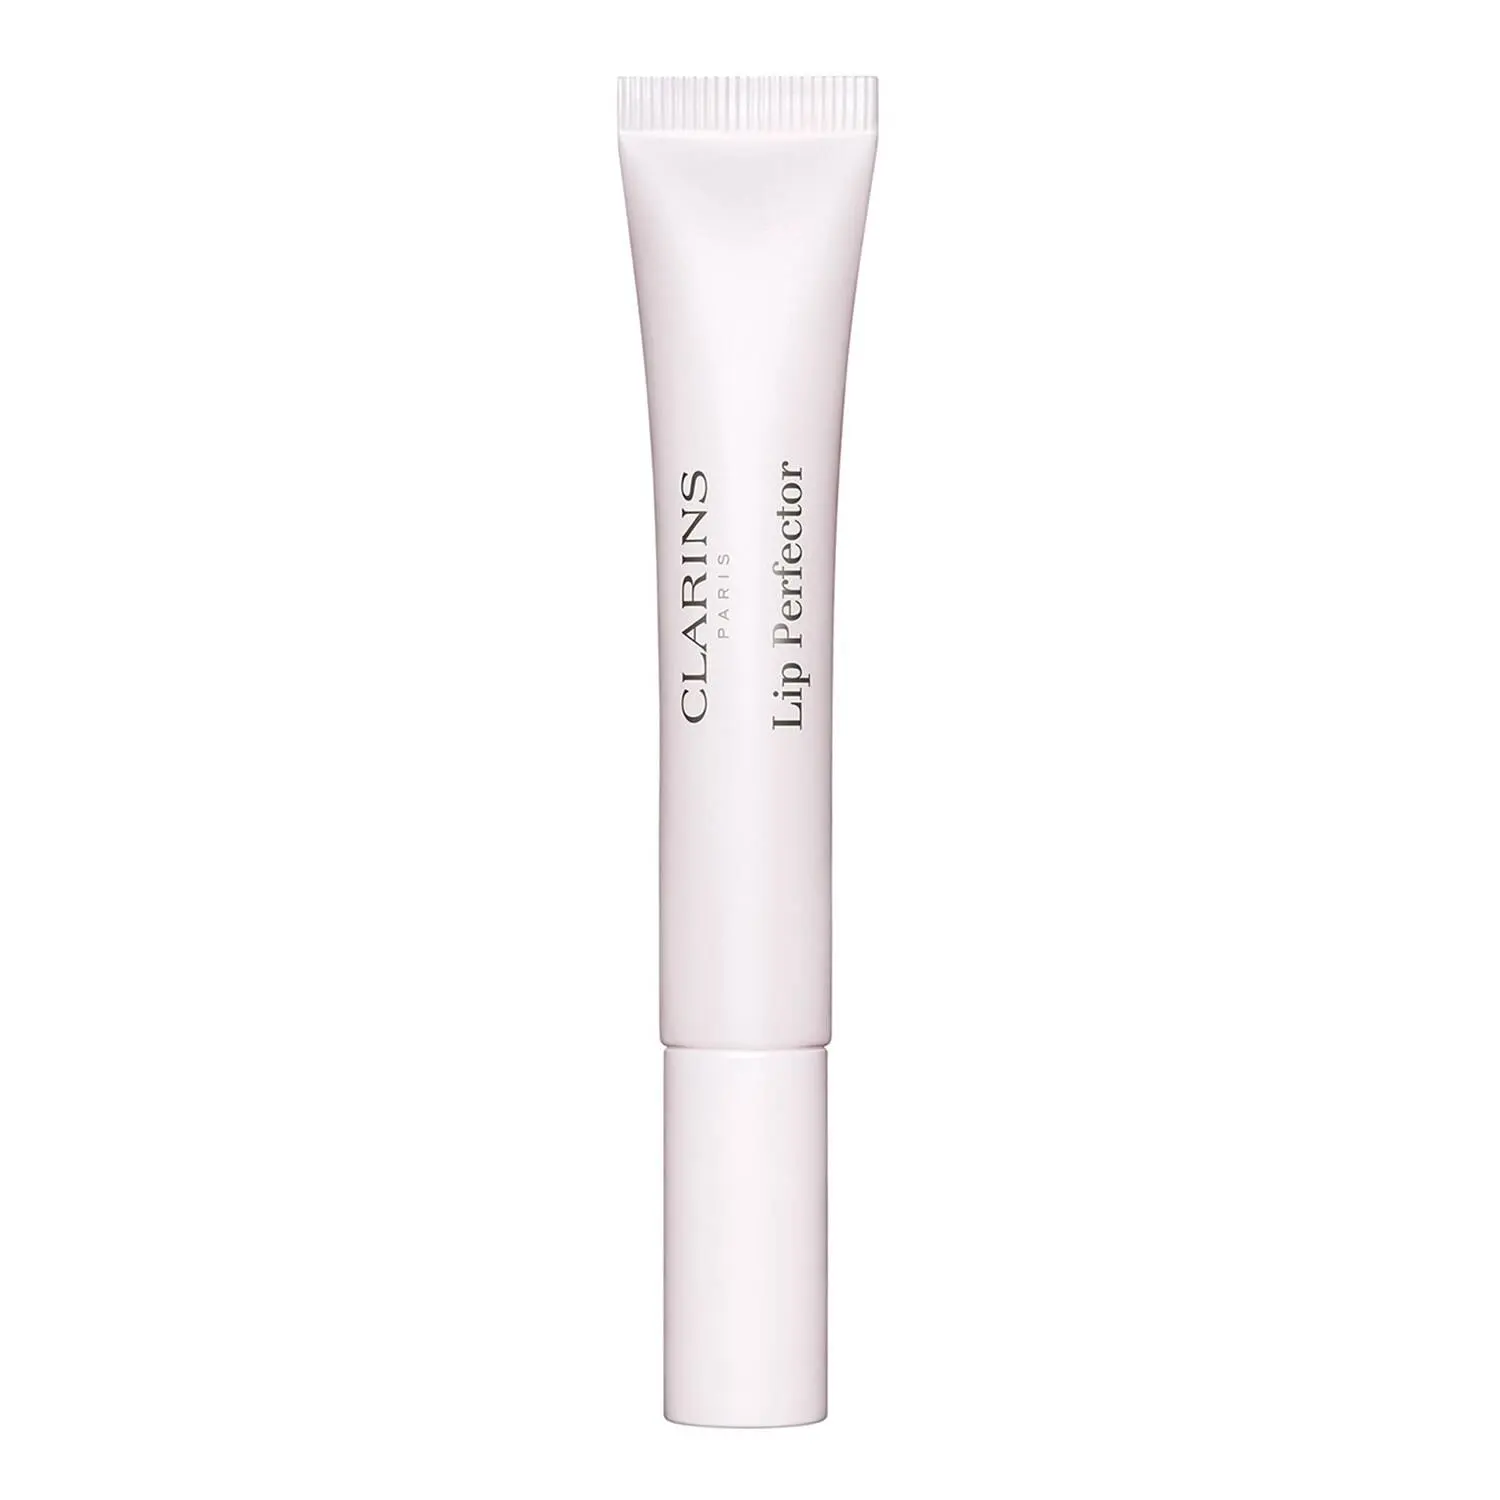 CLARINS Lip Perfector - with Shea Butter 12ml Discounts and Cashback